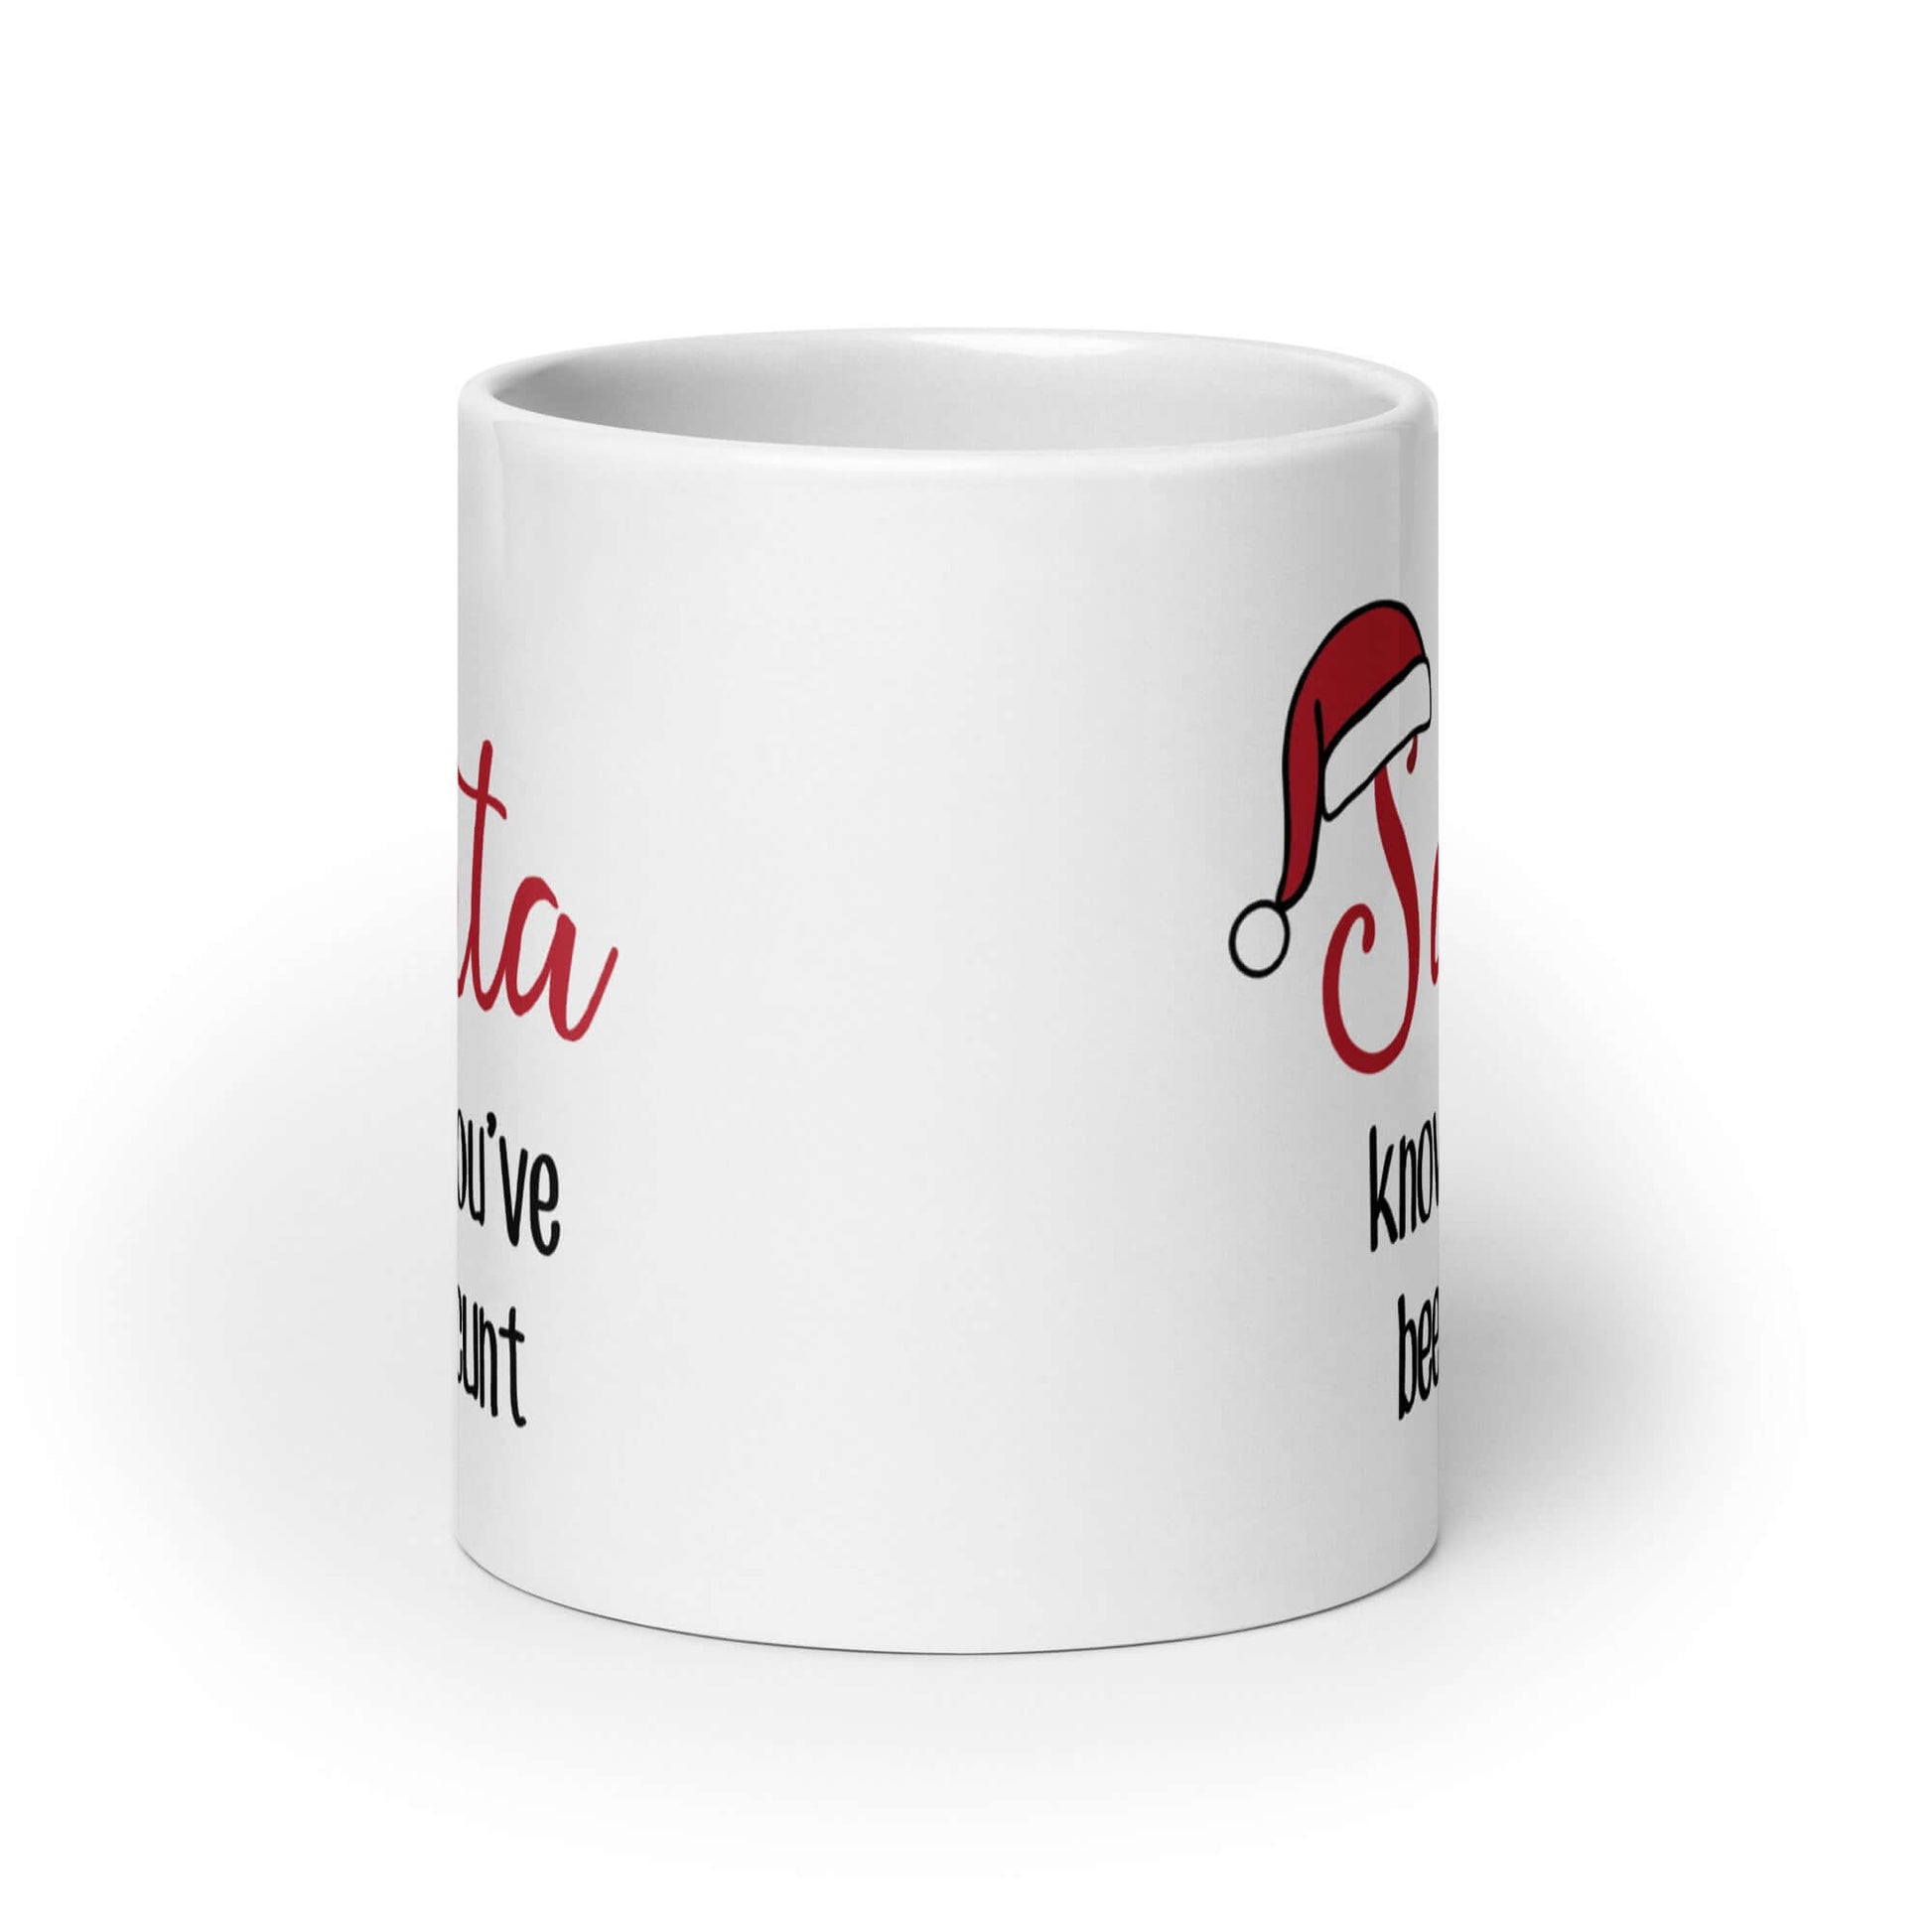 White ceramic mug with the words Santa knows you've been a cunt printed on both sides. There is a red Santa hat on the S in Santa.